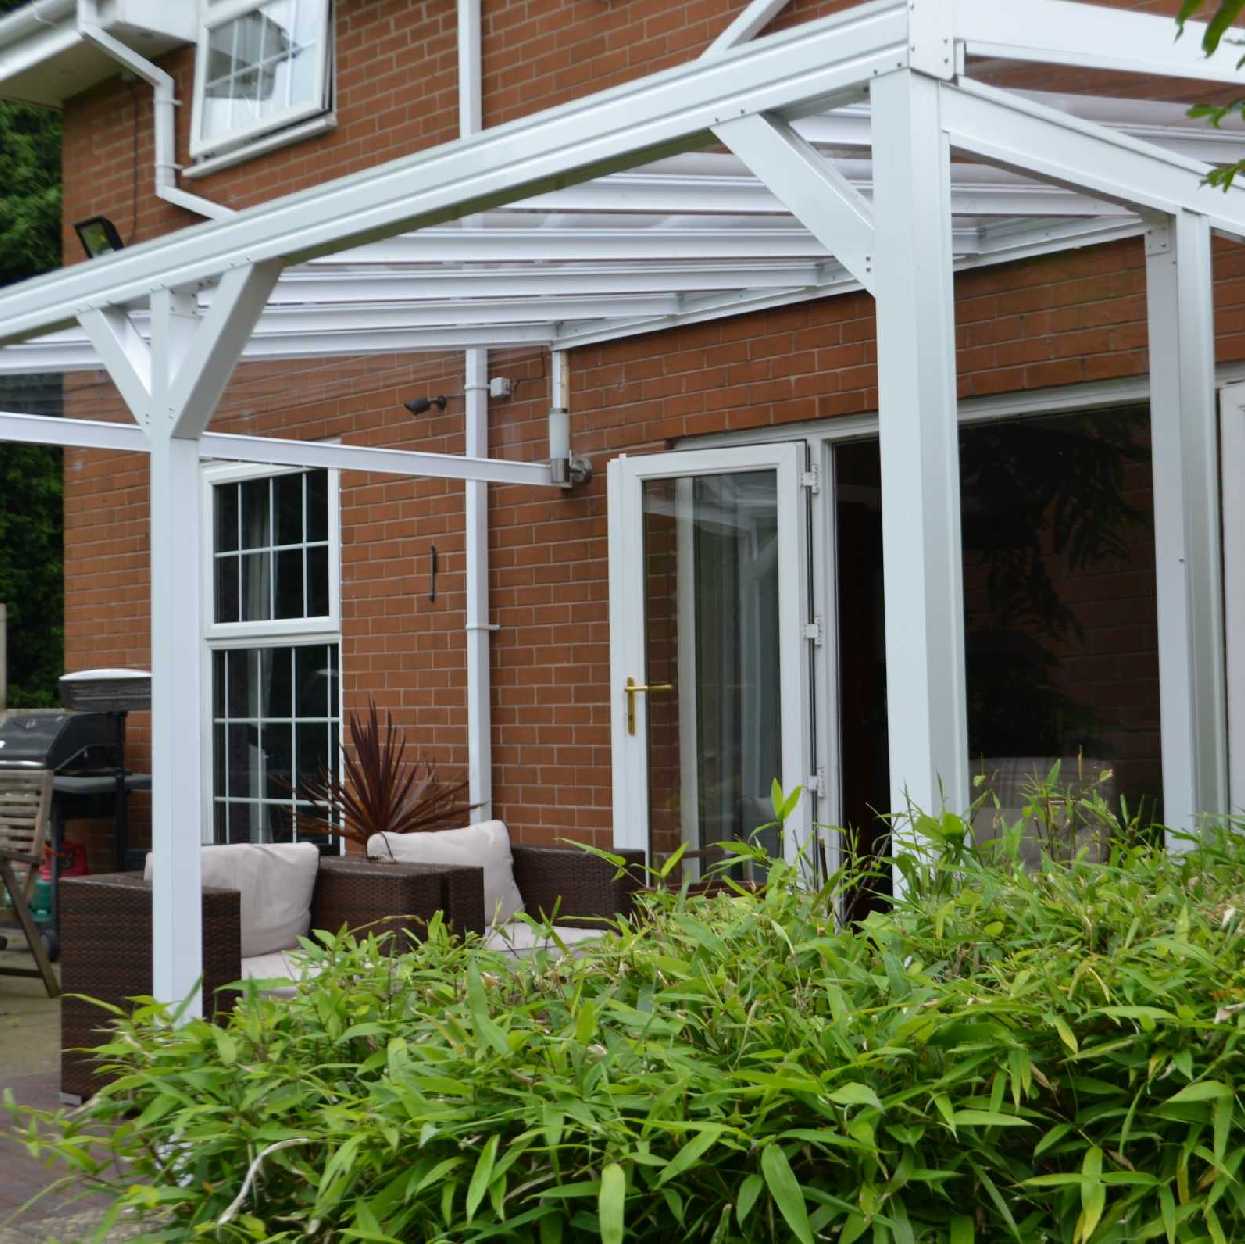 Omega Smart Lean-To Canopy, White with 6mm Glass Clear Plate Polycarbonate Glazing - 7.7m (W) x 3.0m (P), (4) Supporting Posts from Omega Build